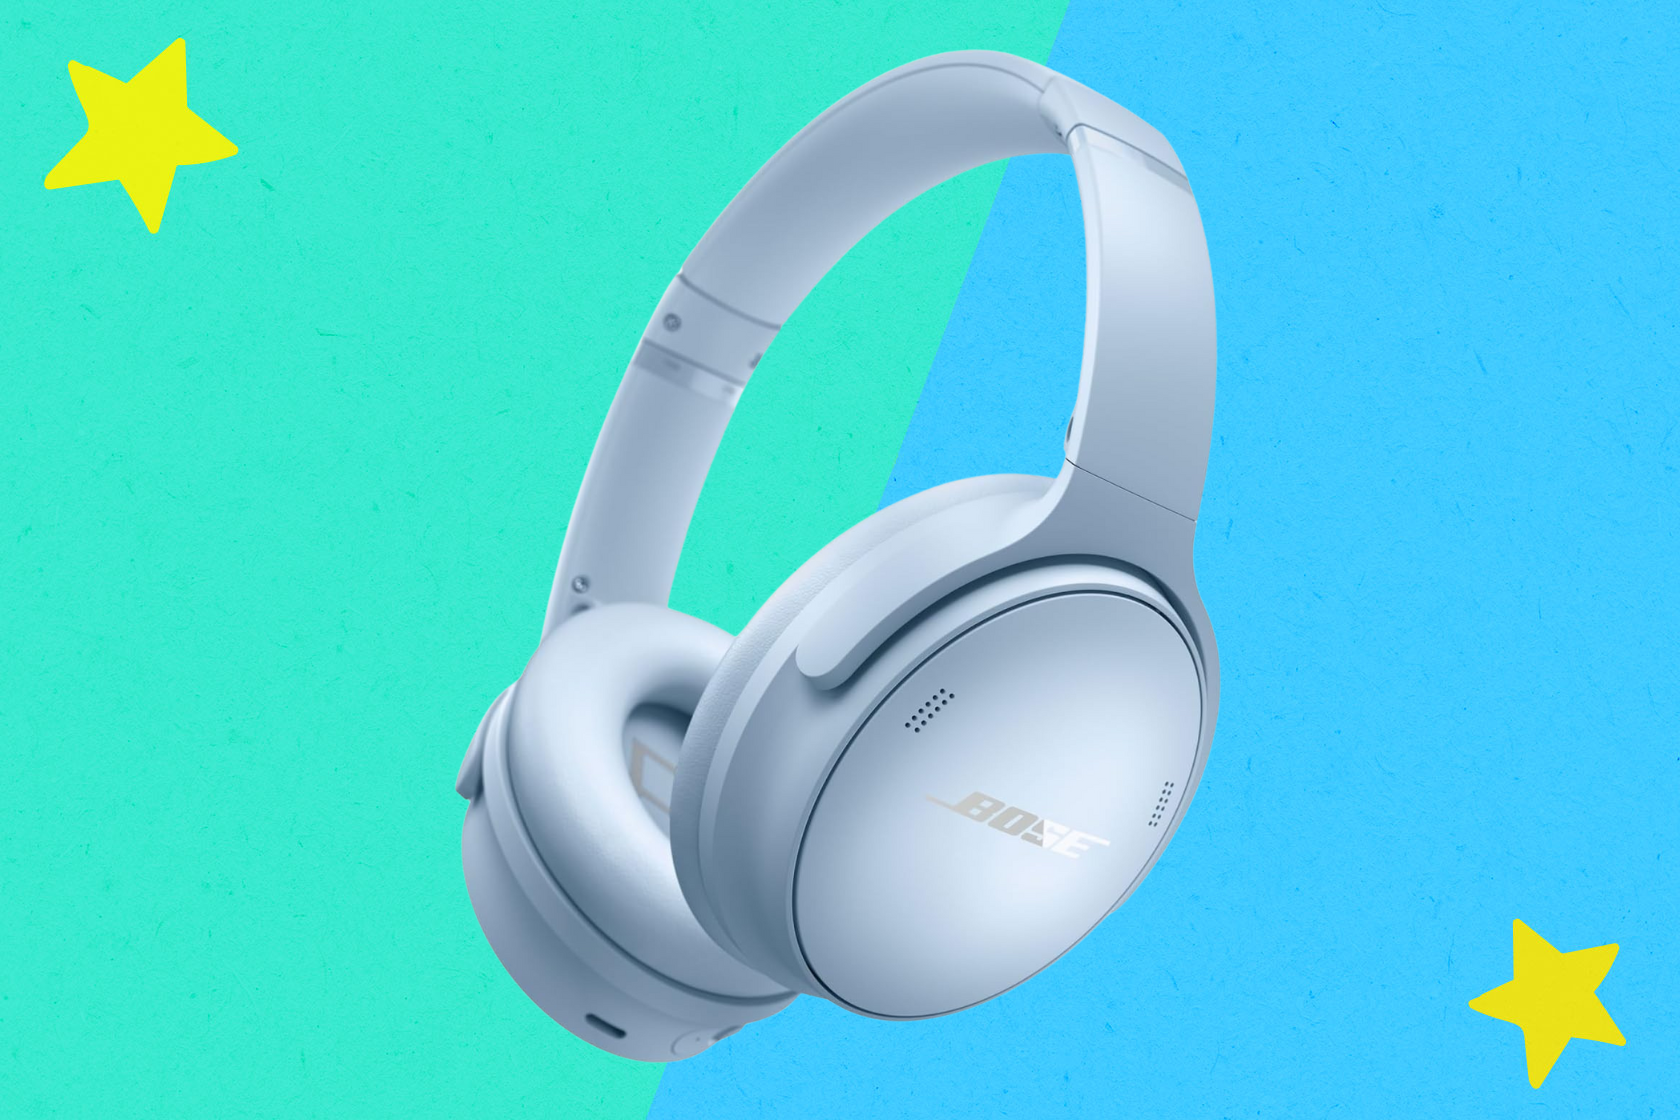 These wireless Bose headphones are $249 — their lowest price ever